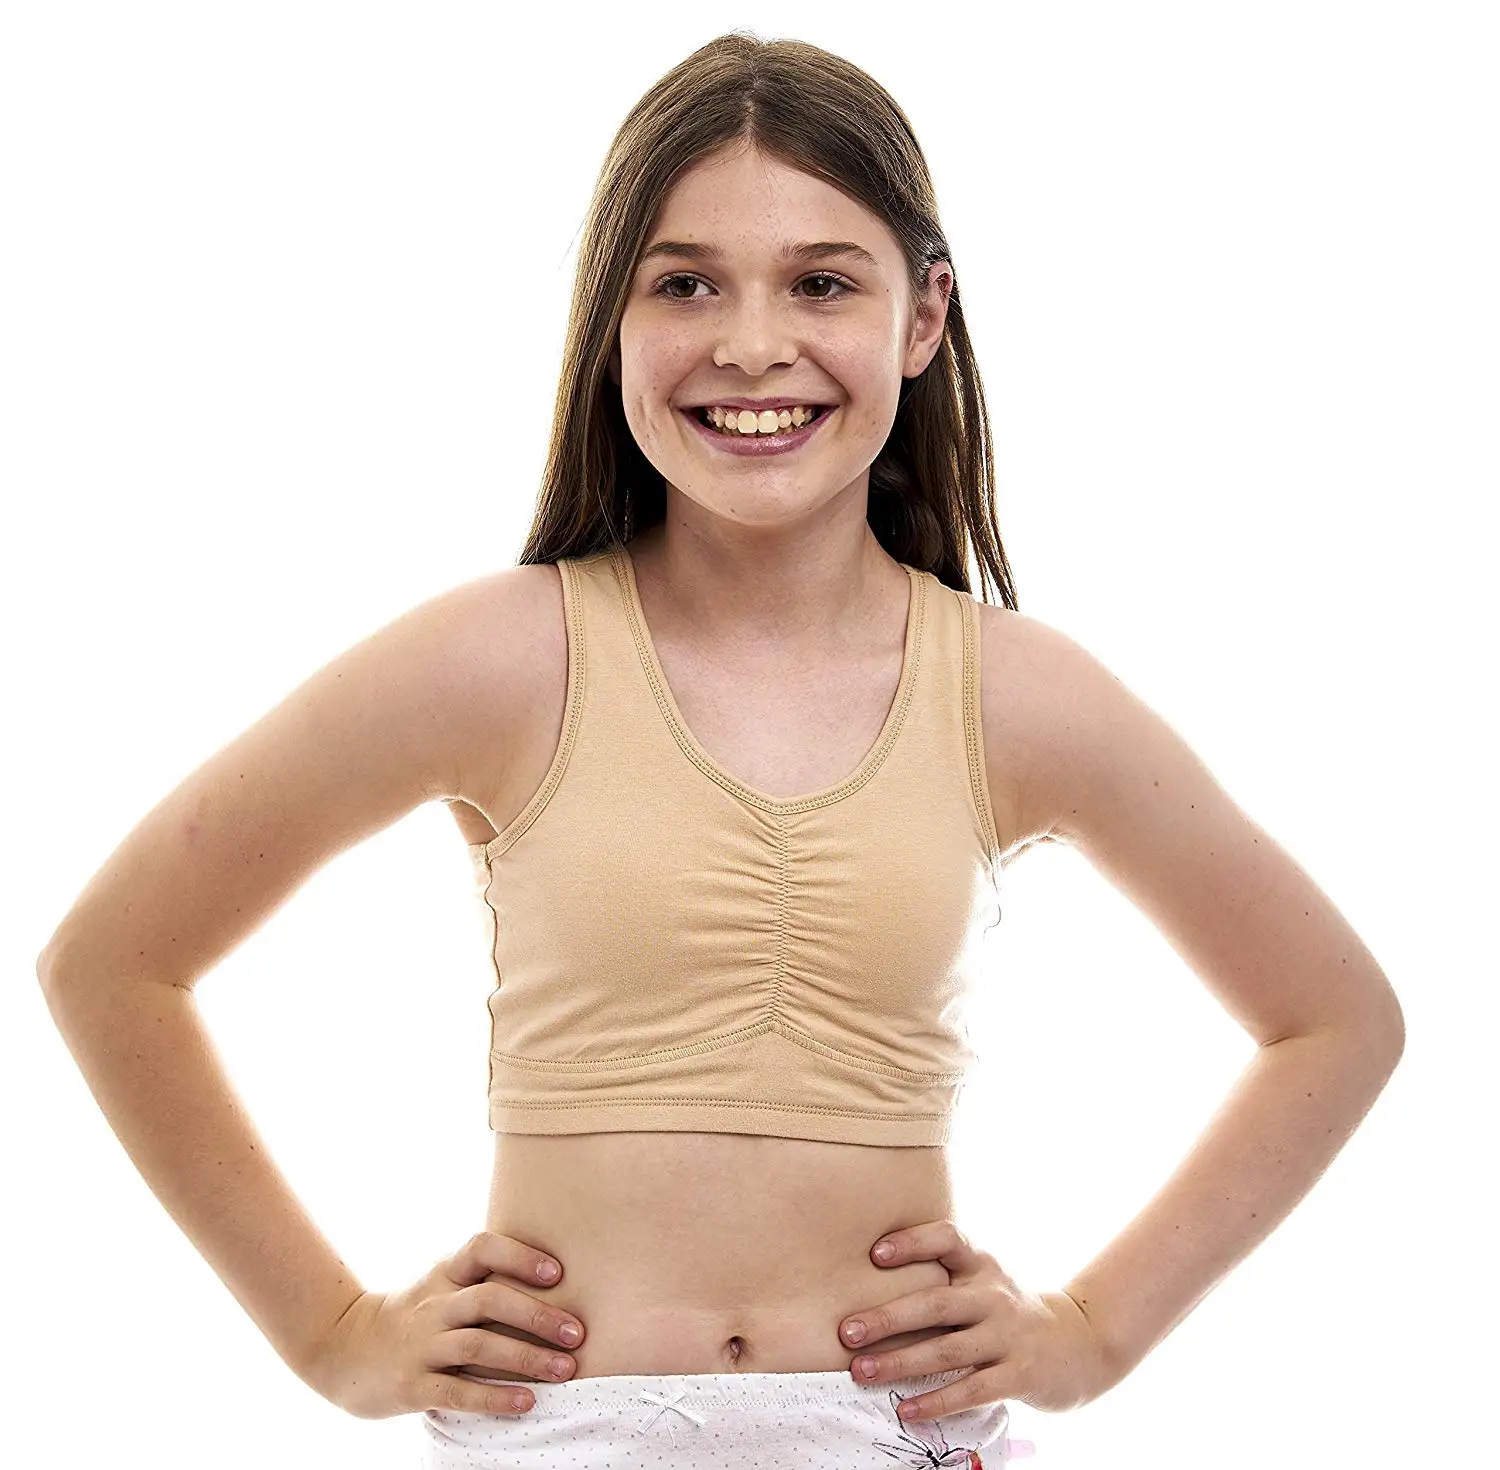 The five stages of breast development in girls during puberty